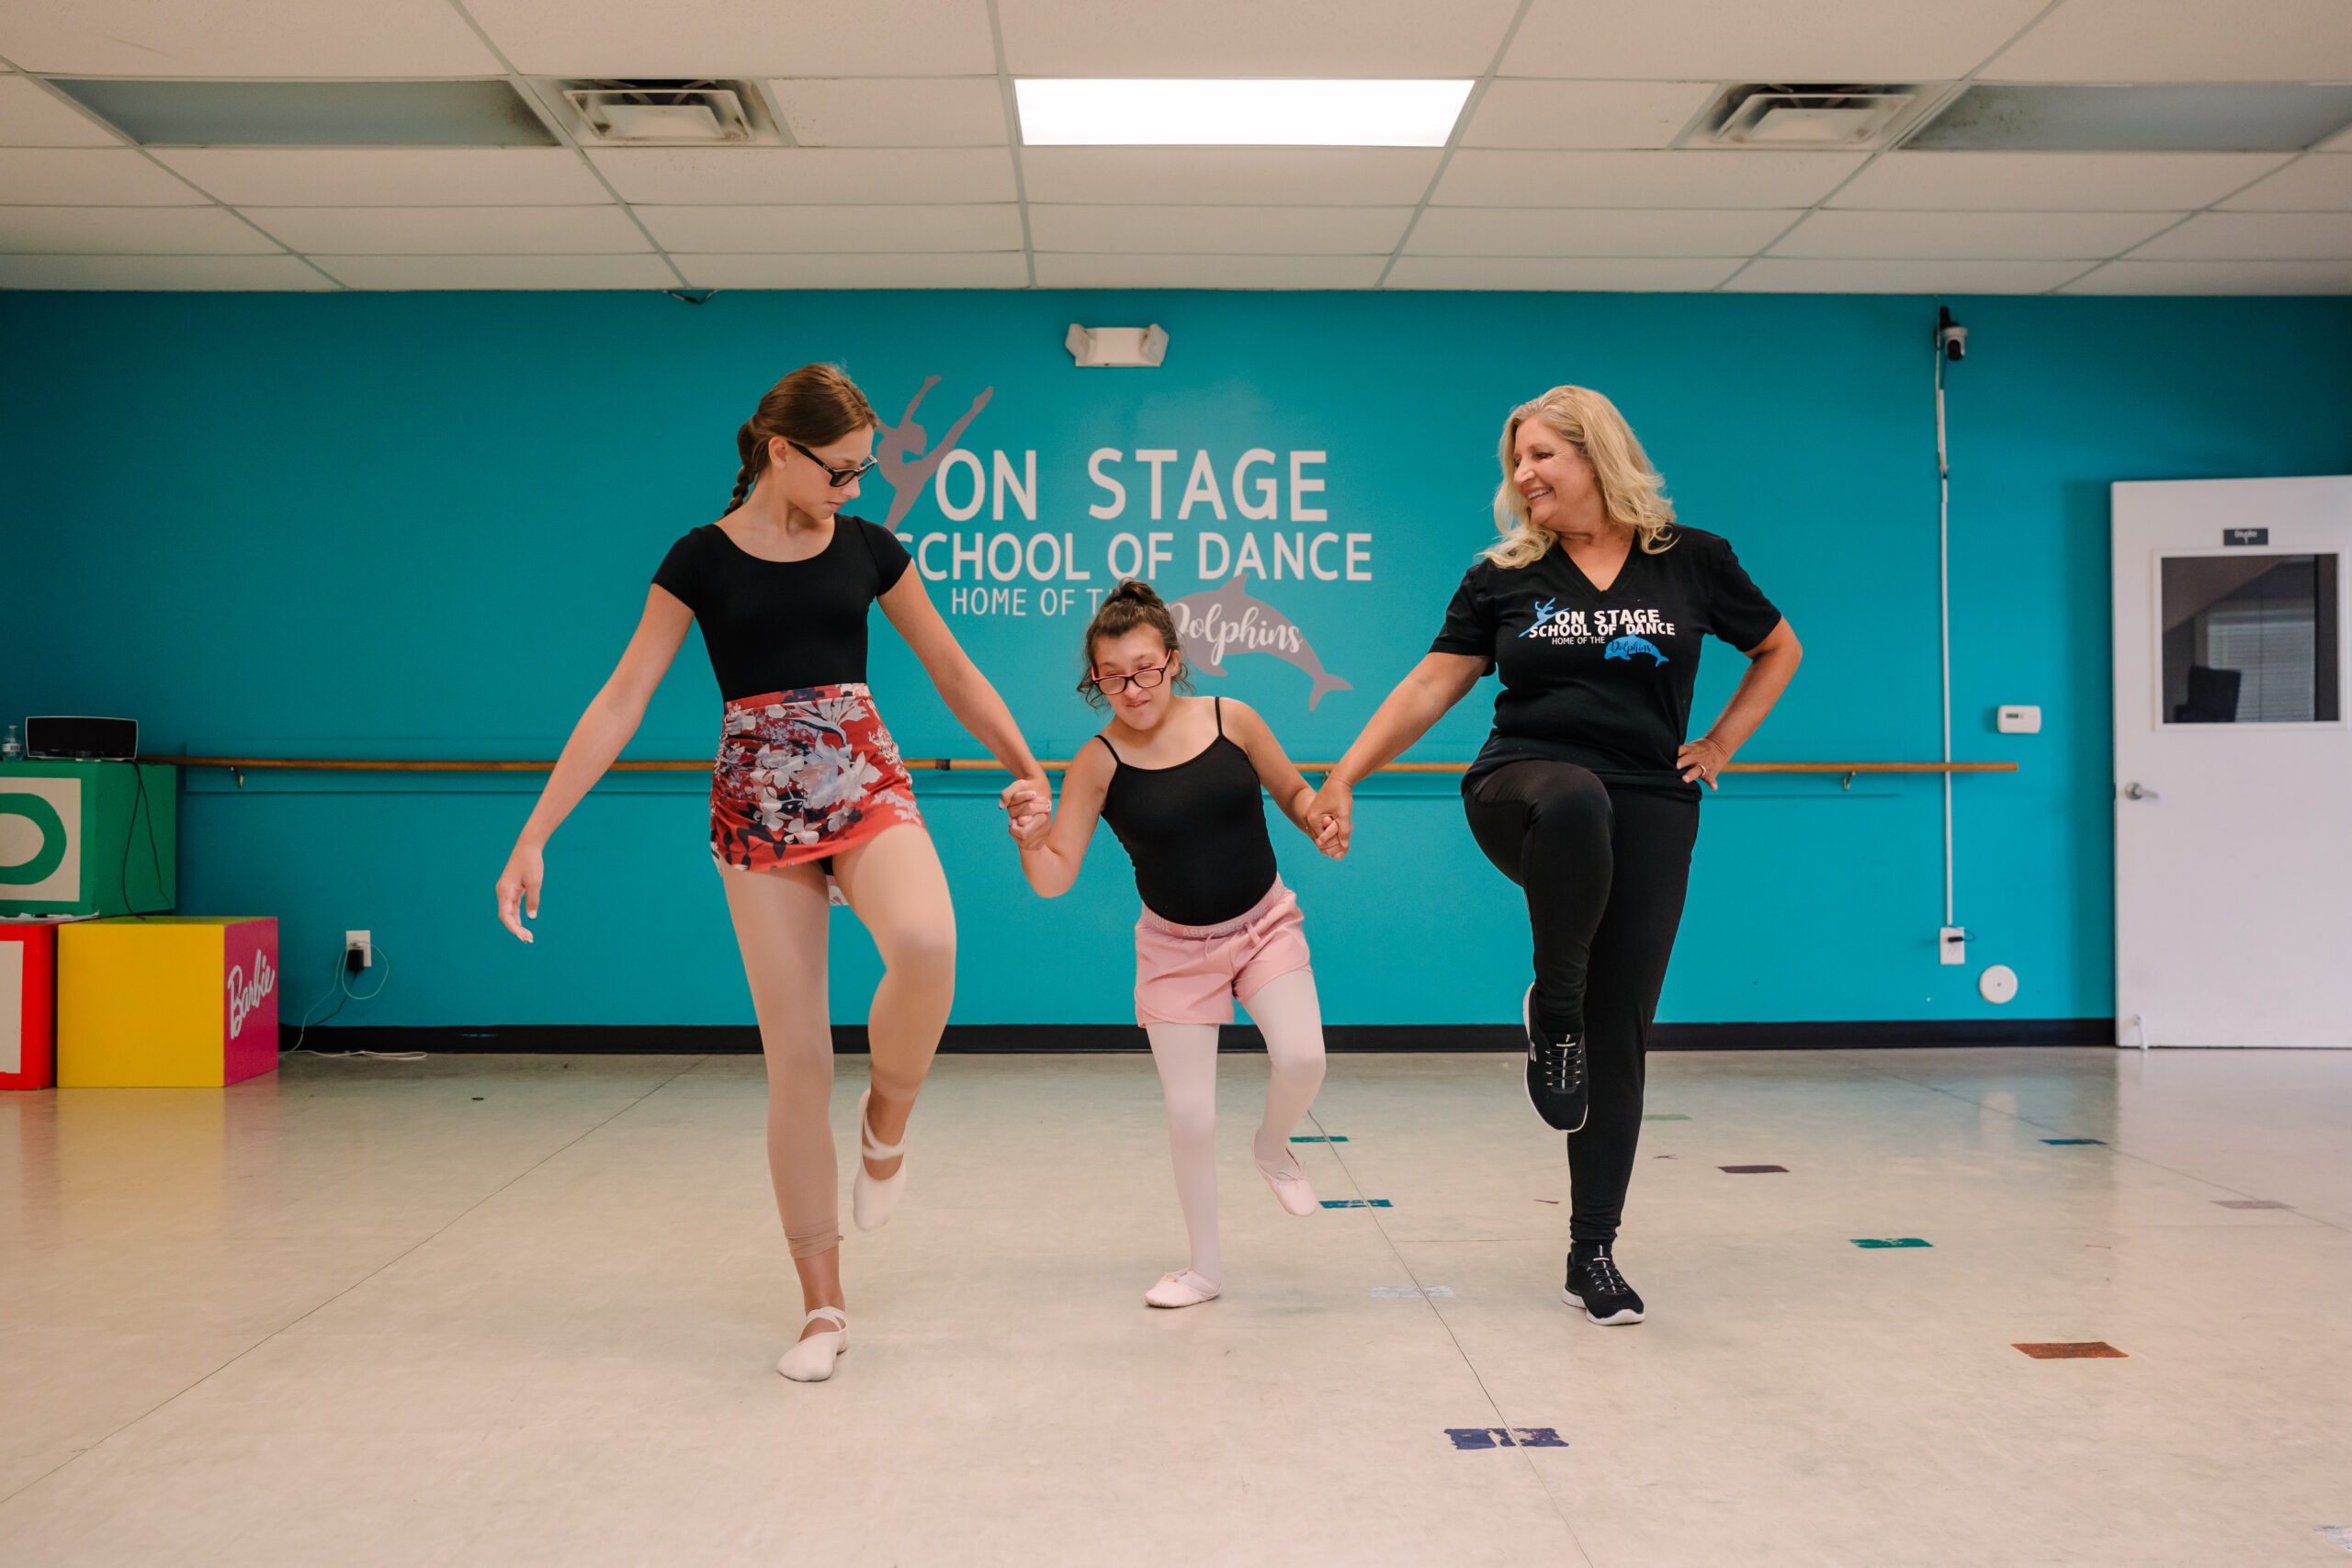 Lori dances with one of her Shining Star students, Kelsey at the On Stage School of Dance studio in High Point, NC.